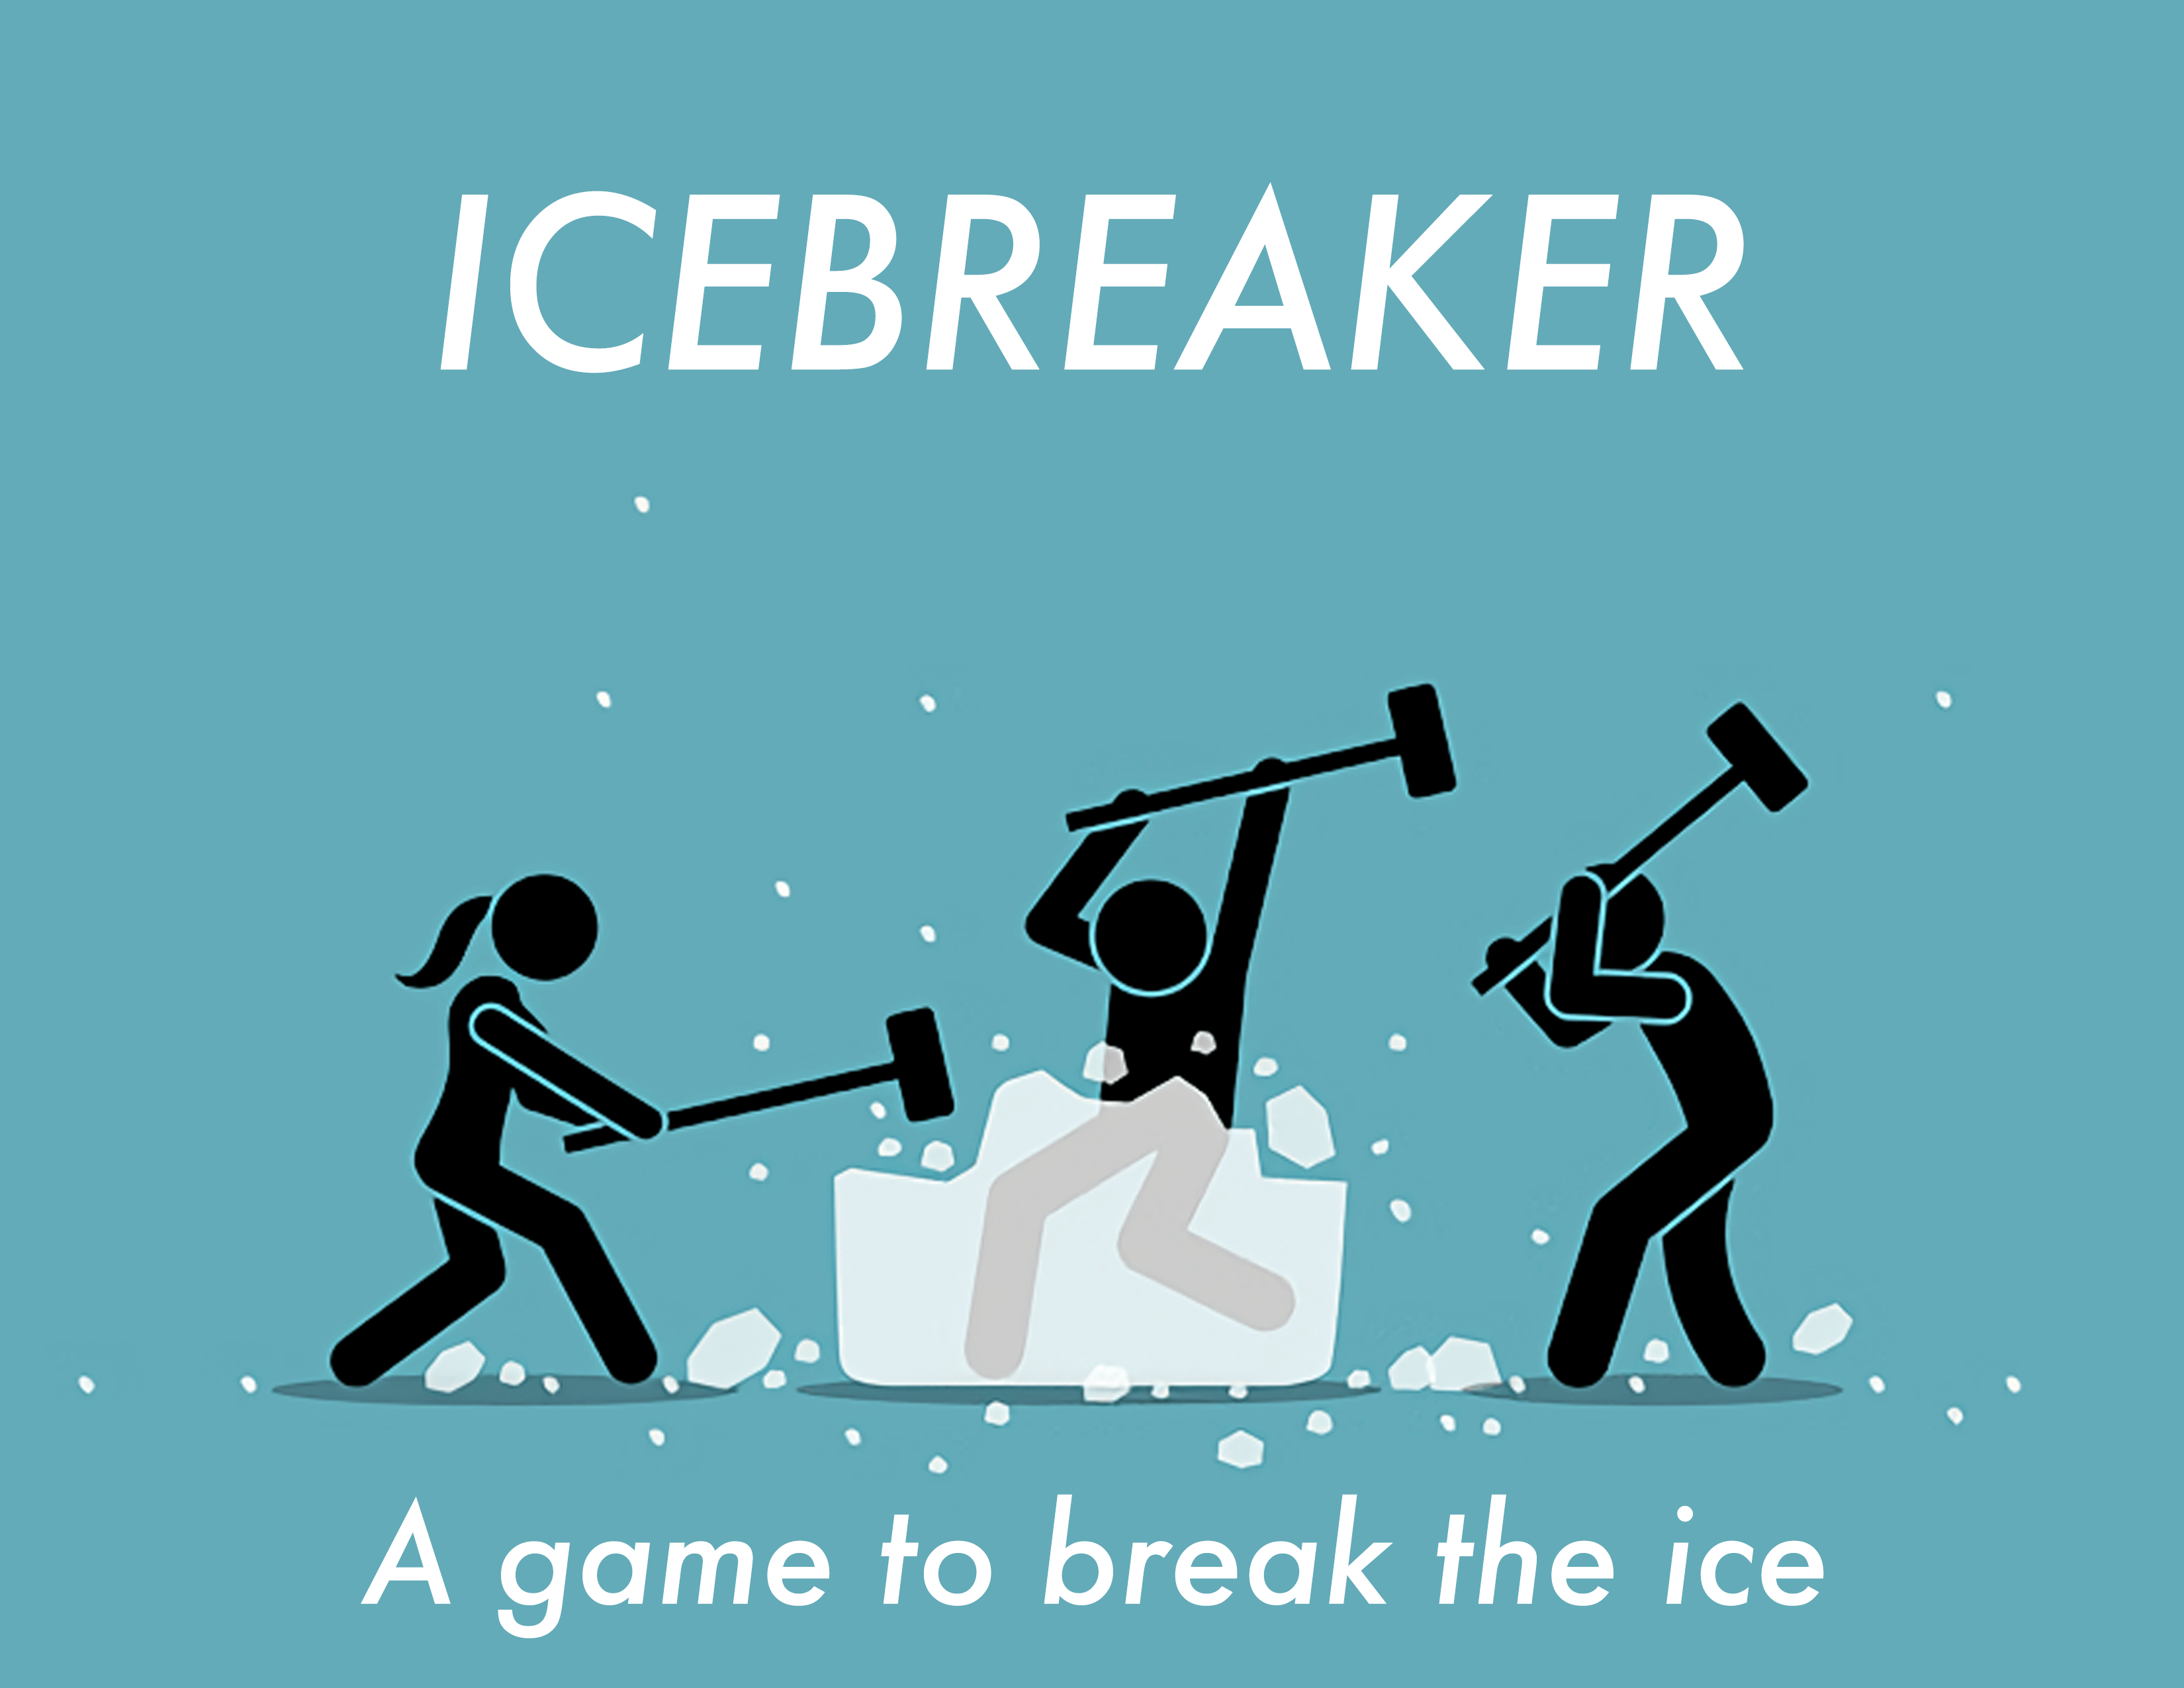 A stock photo of three people hammering a block of ice. Underneath, text reads 'Icebreaker'.